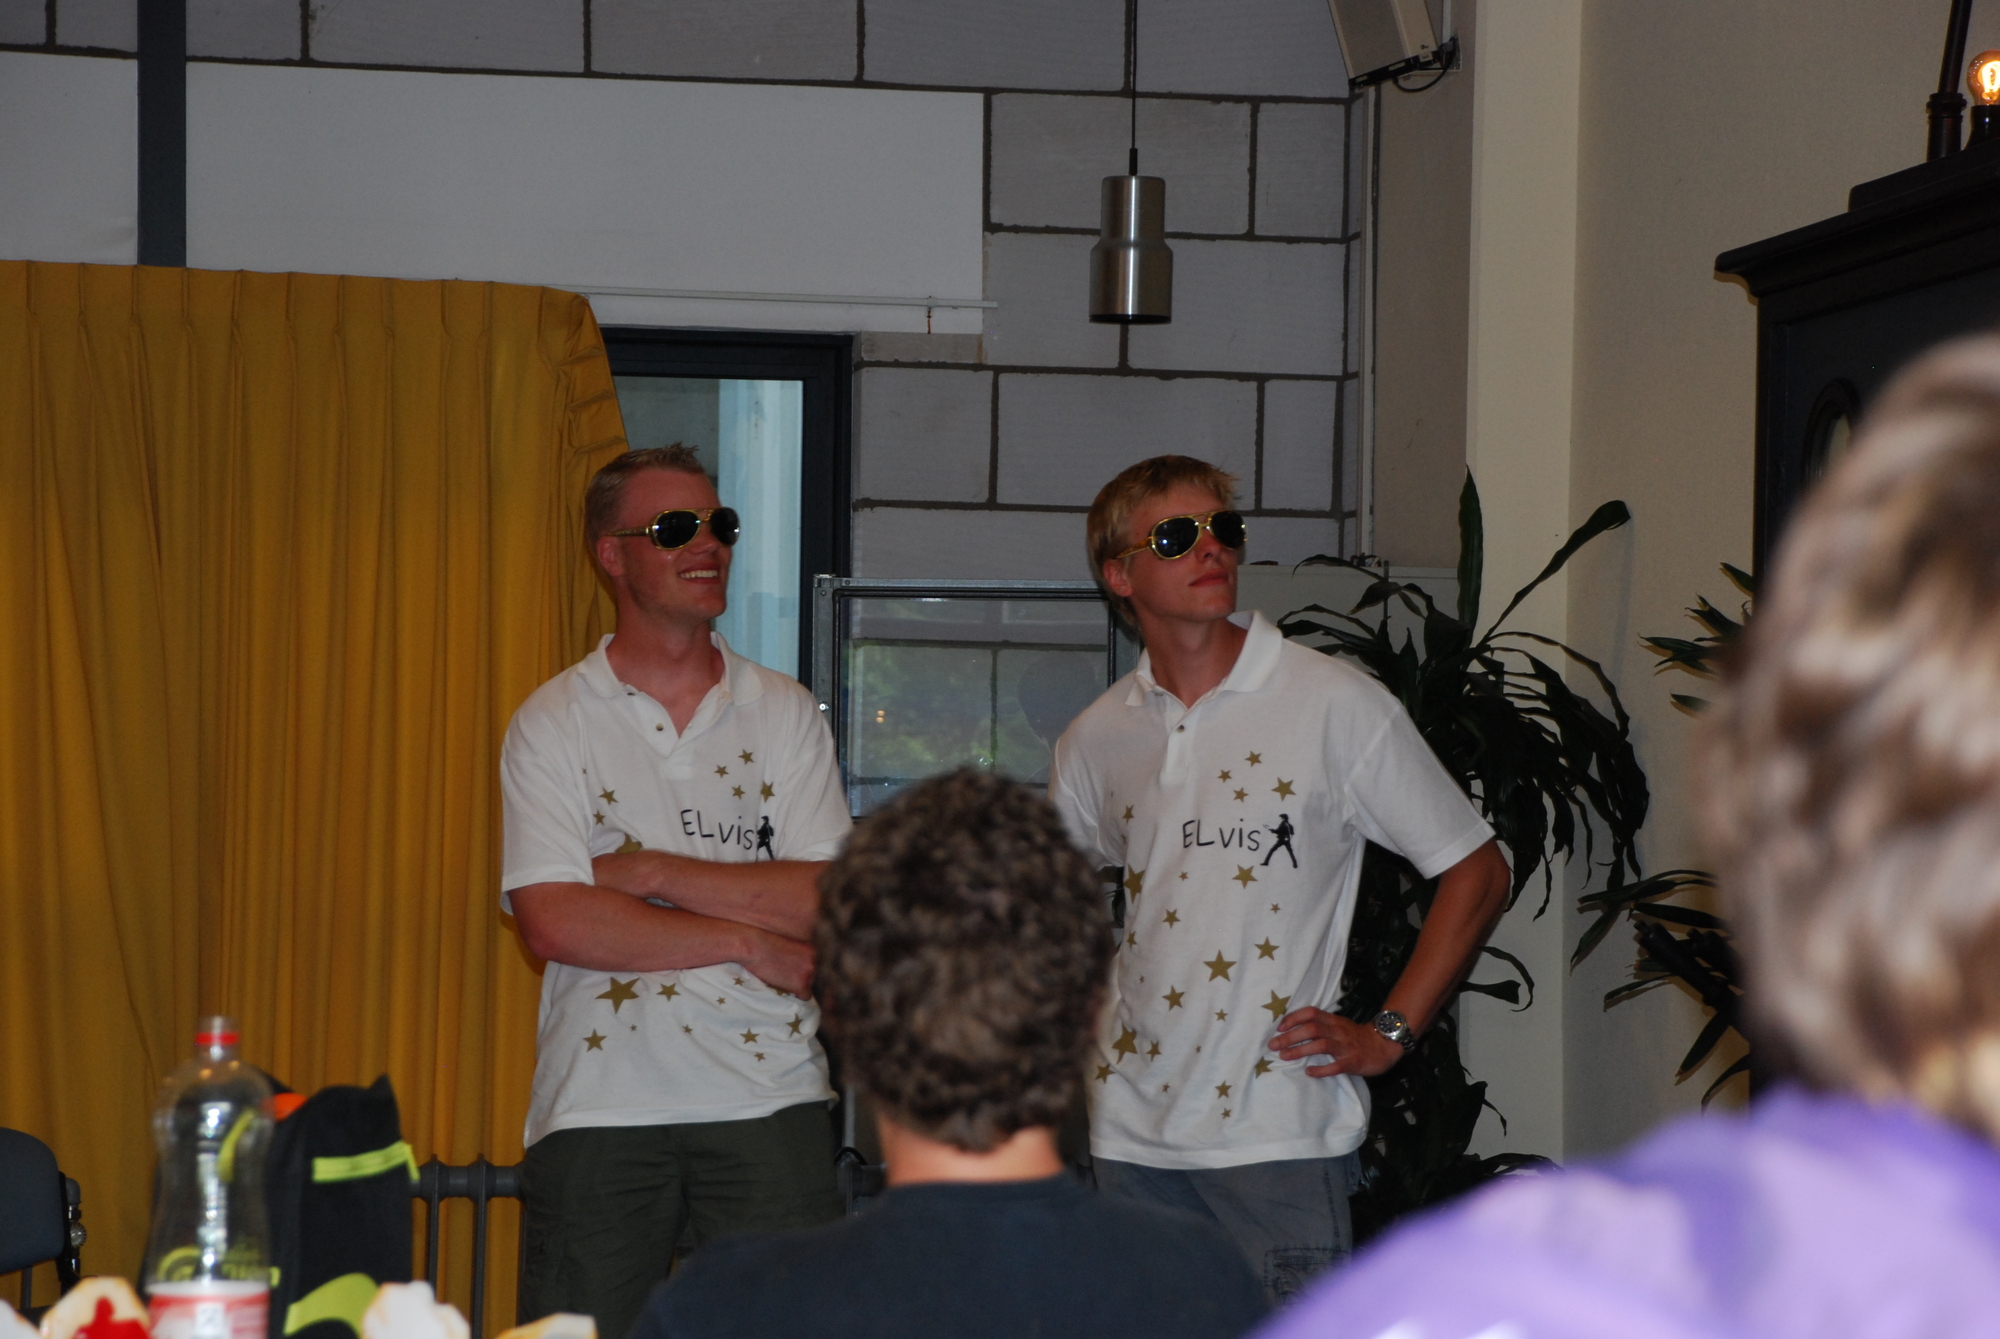 A do-group presentation by the parents of Elvis I in 2009 in the Hogekamp.